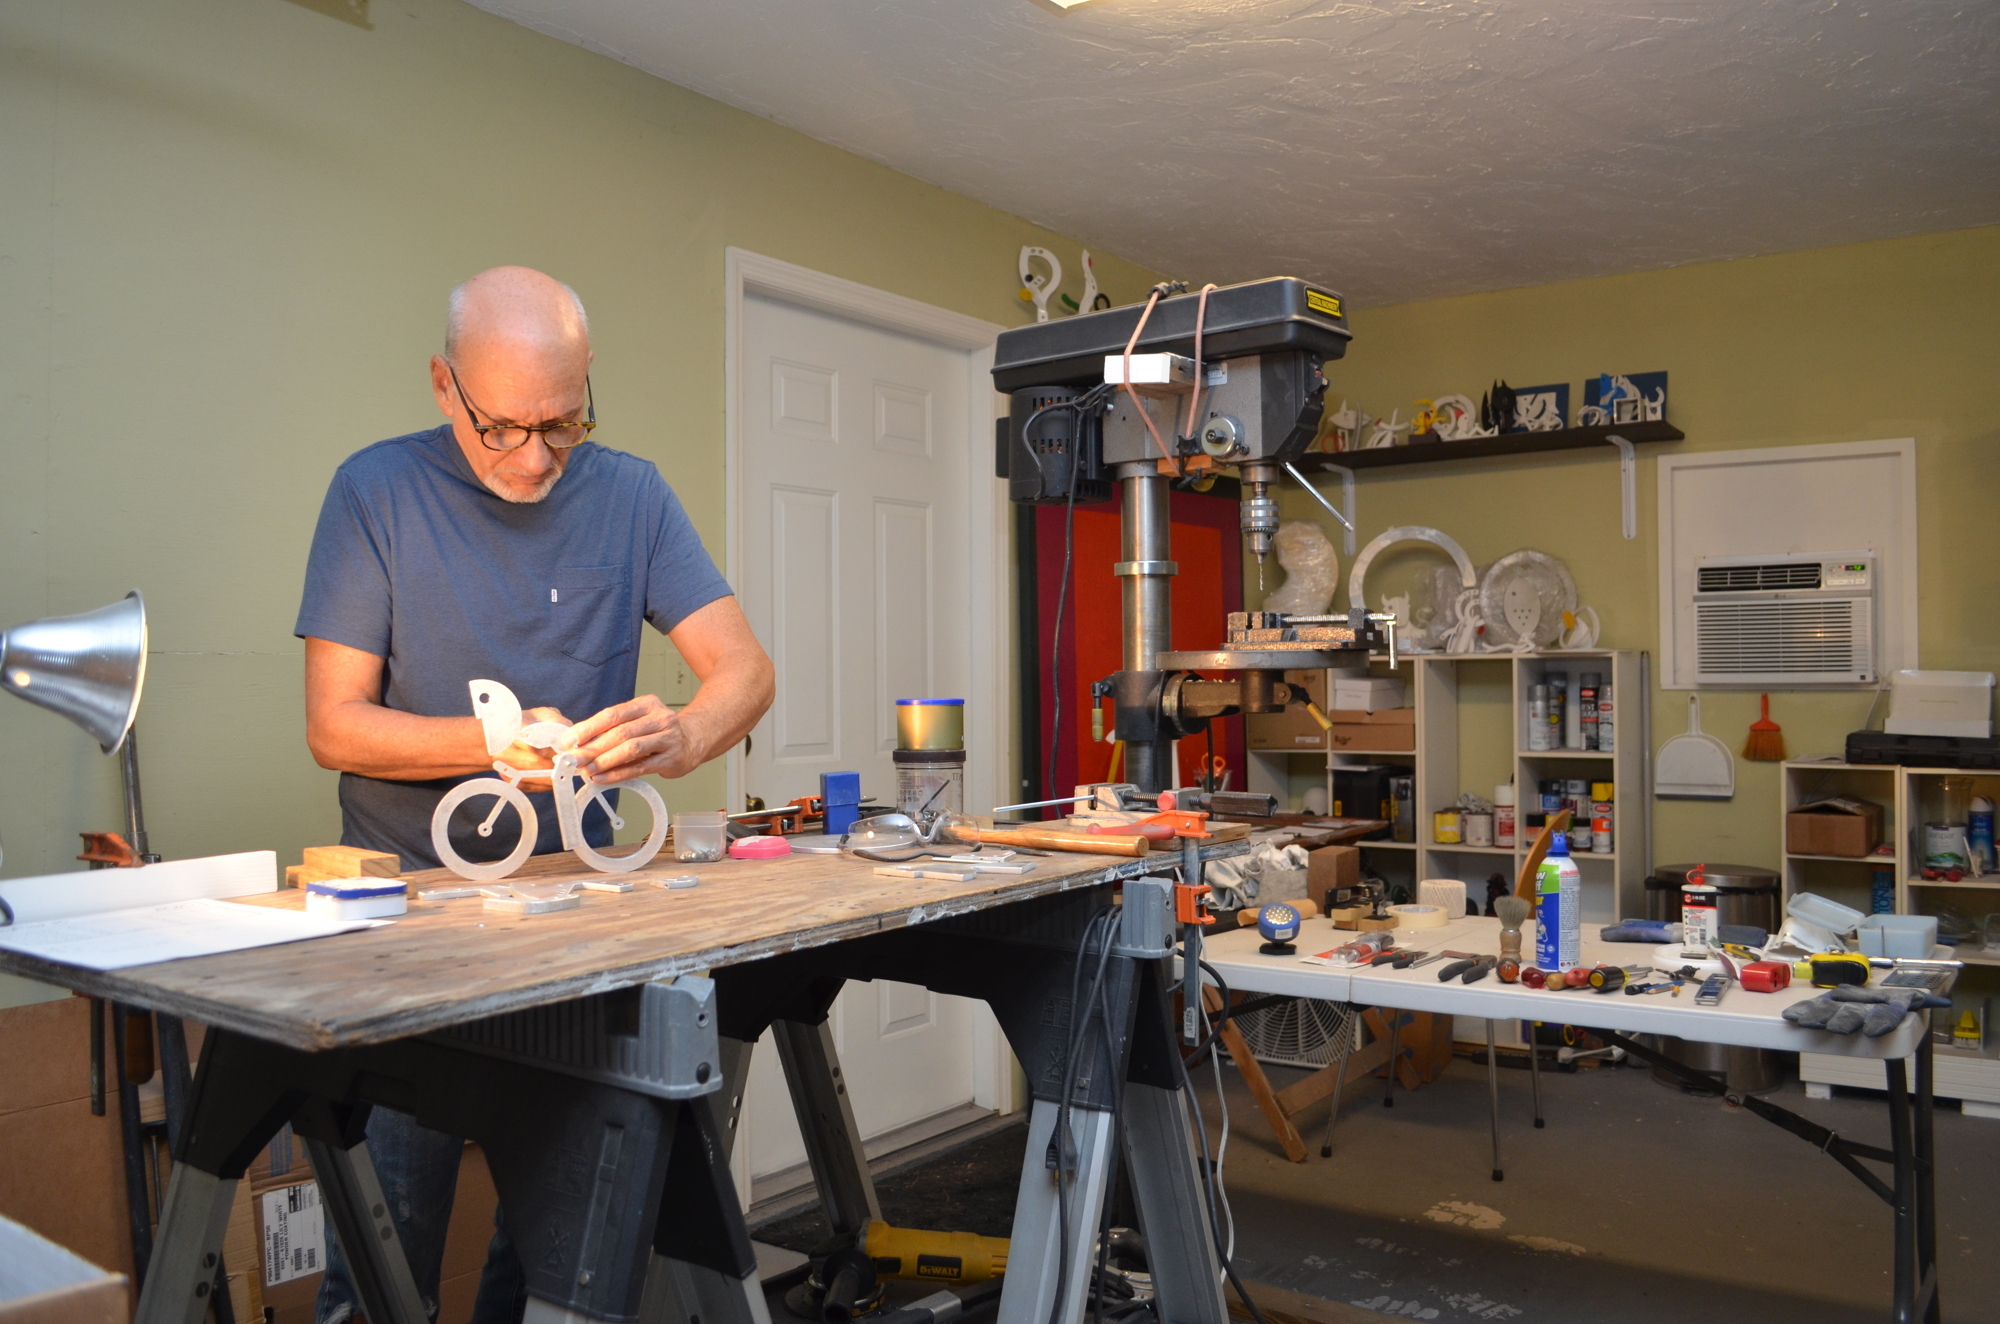 Although the bright colors and slices of everyday life might seem cheerful and care-free, when sculptor Jorge Blanco is in his home studio workshop, it’s all about one thing: serious sculpture. (File photo)